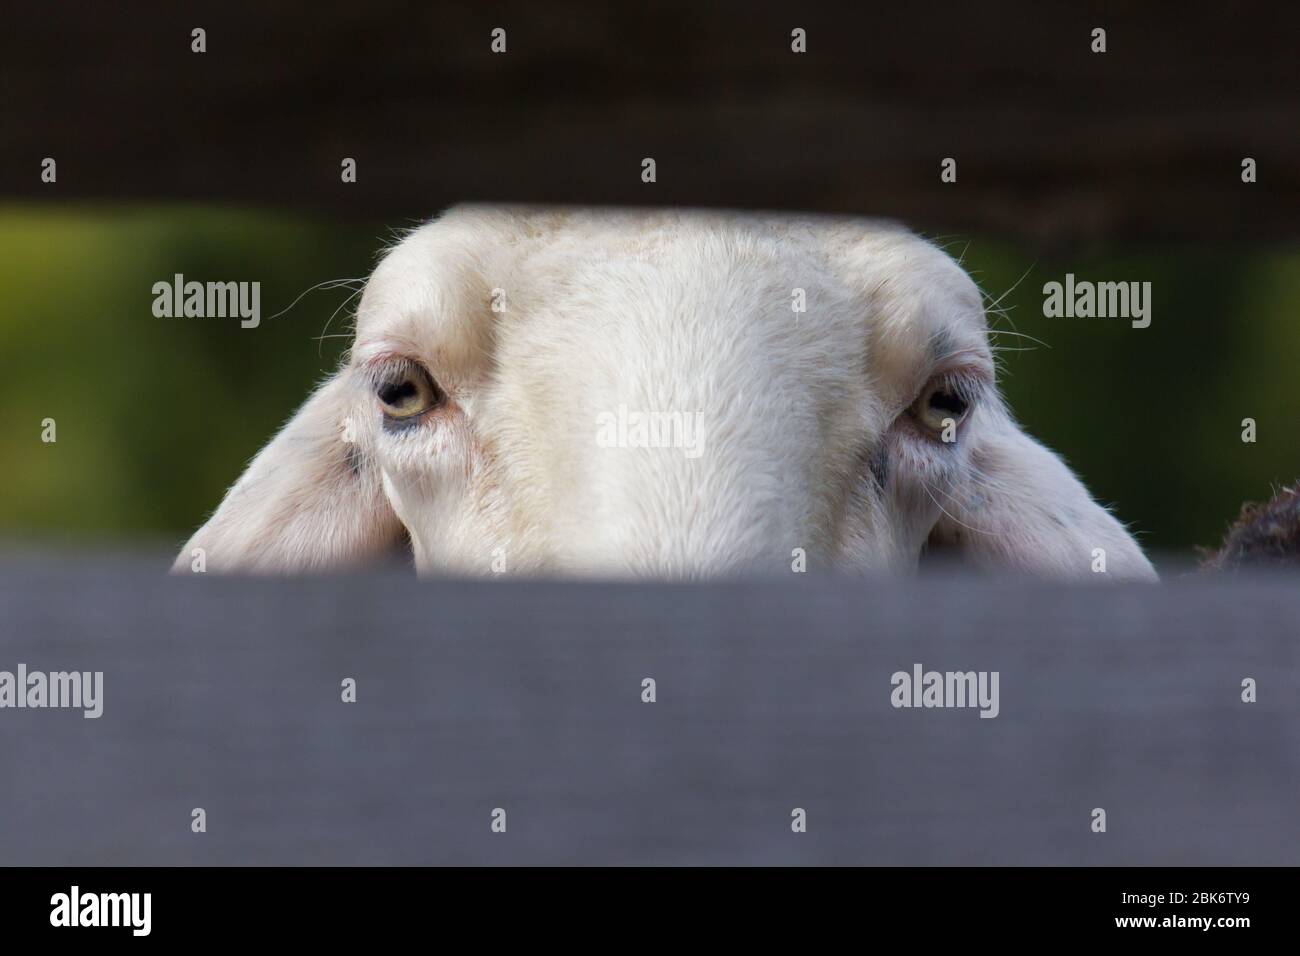 A domesticated sheep (Ovis orientalis aries) peeking between wooden pasture fence Stock Photo